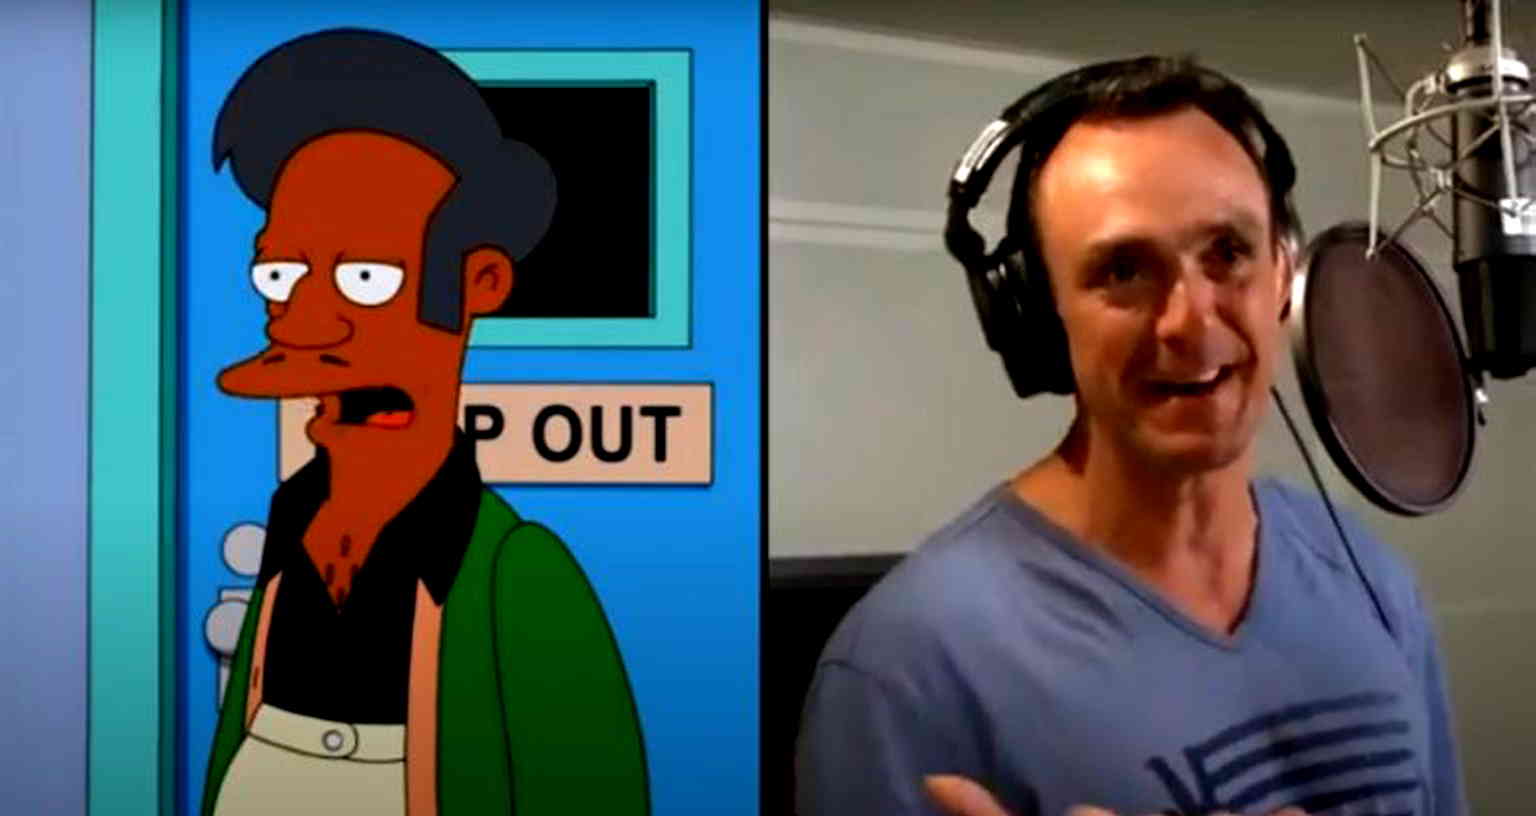 ‘The Simpsons’ Actor Apologizes for Voicing 30 Years of Stereotyped Character Apu